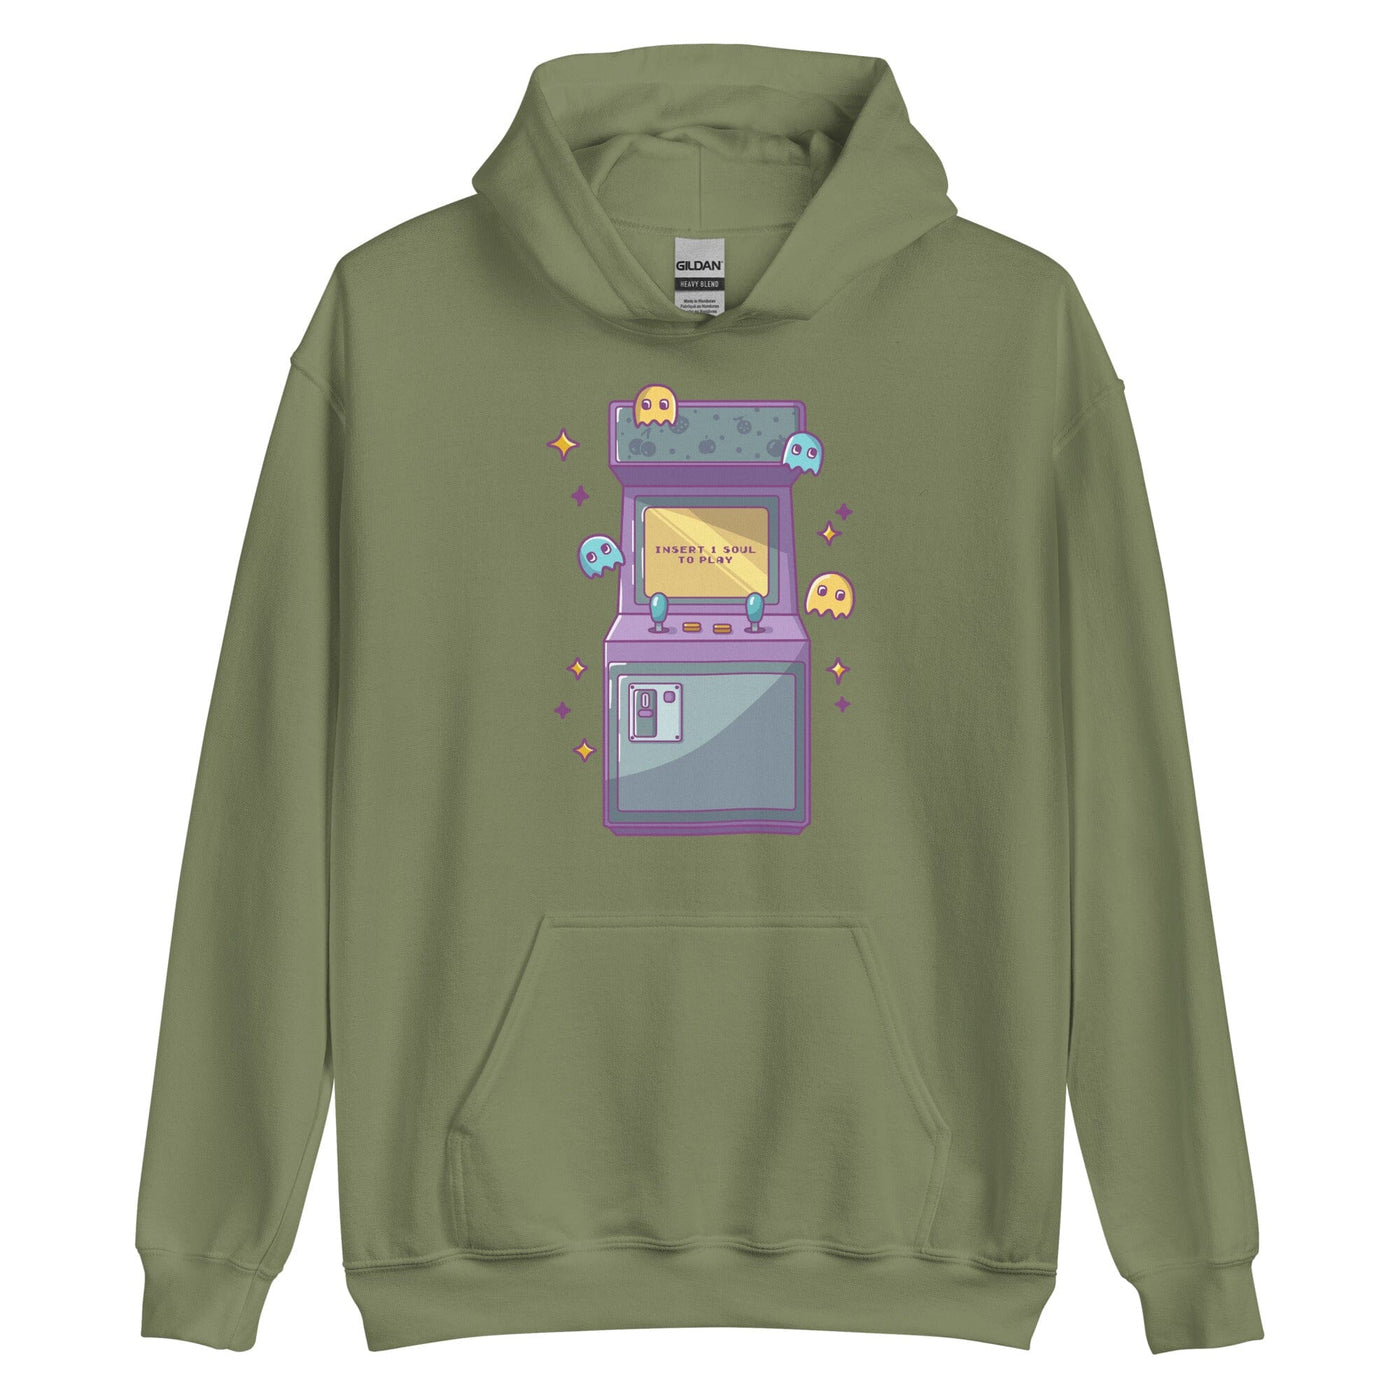 Insert 1 Soul to Play | Unisex Hoodie | Retro Gaming Threads & Thistles Inventory Military Green S 